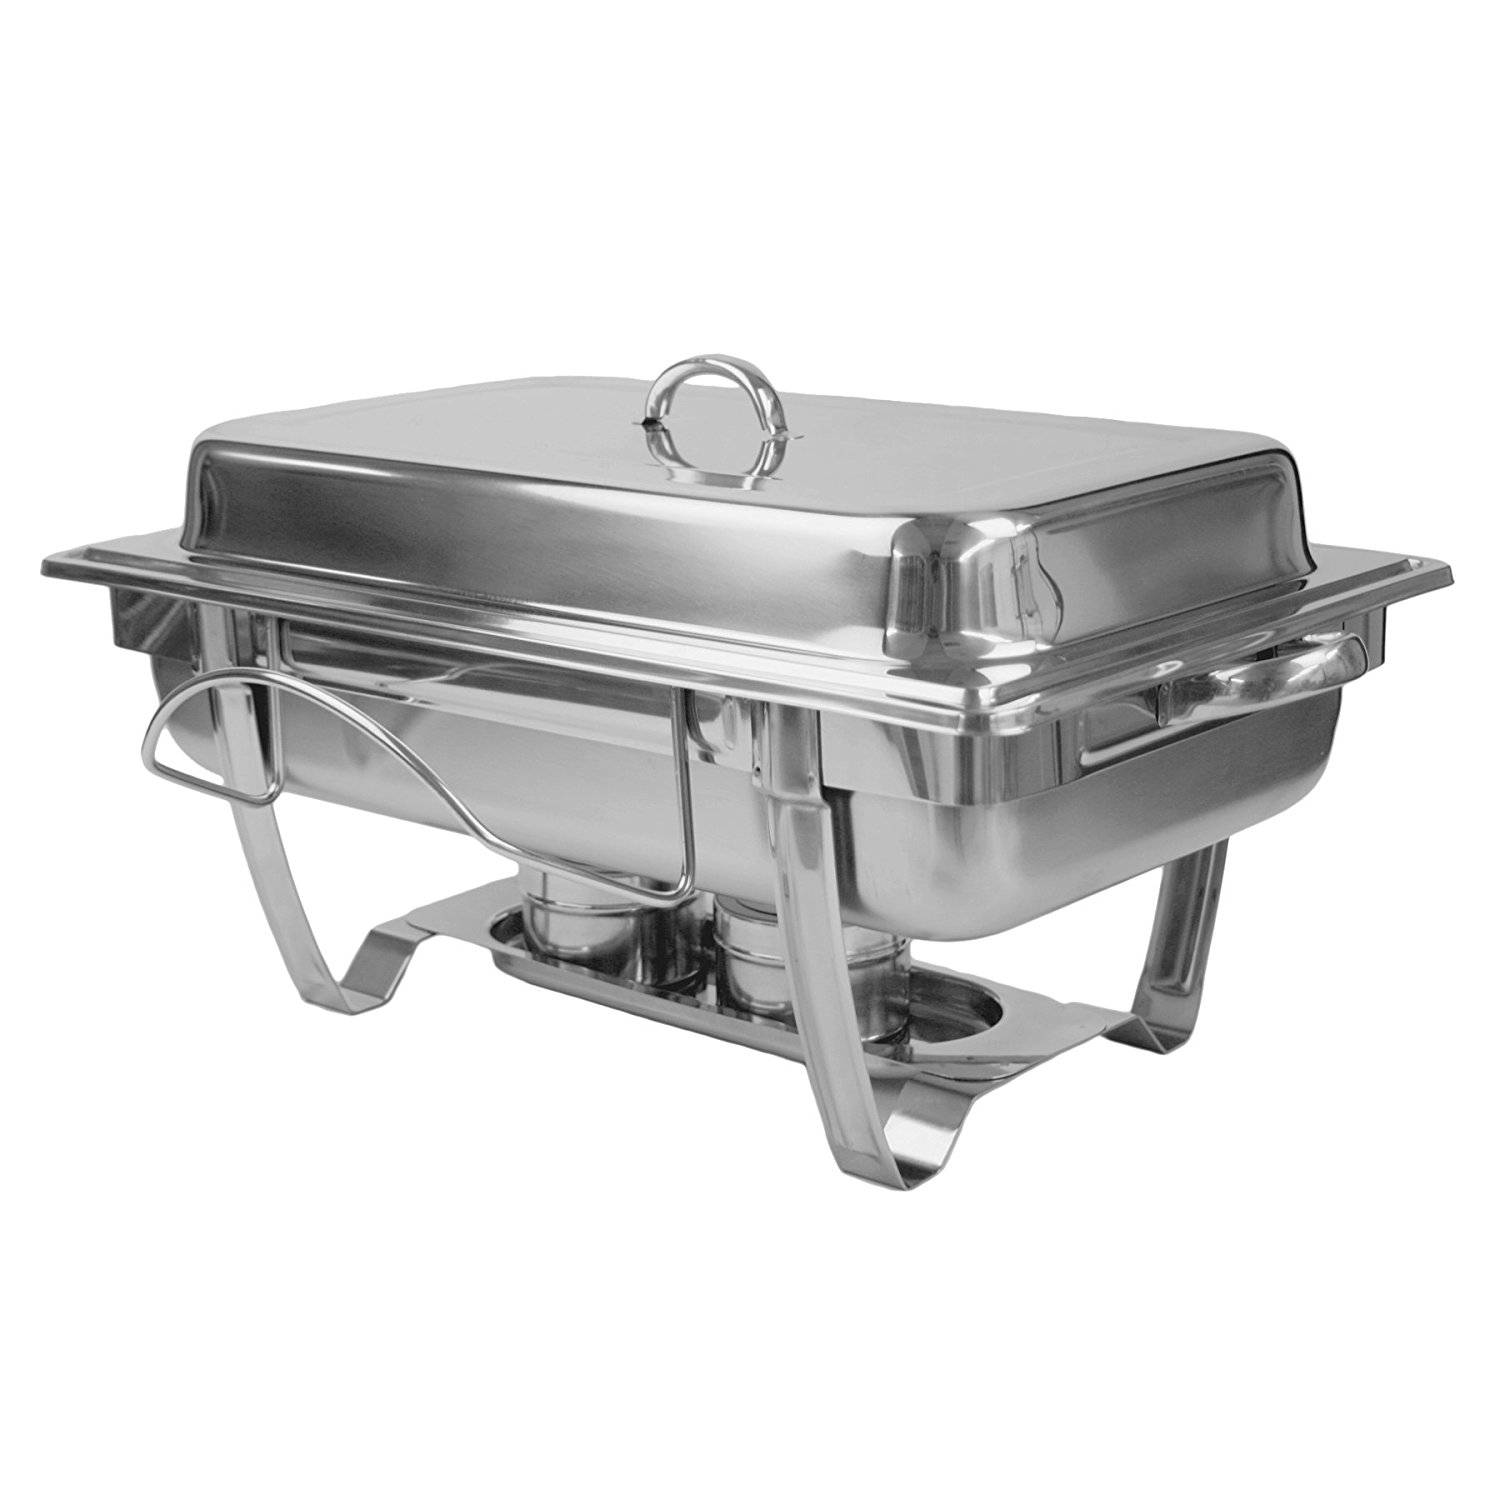 Amazon.com: Excellante 8 Quart Stainless Steel Chafer, Stackable ...